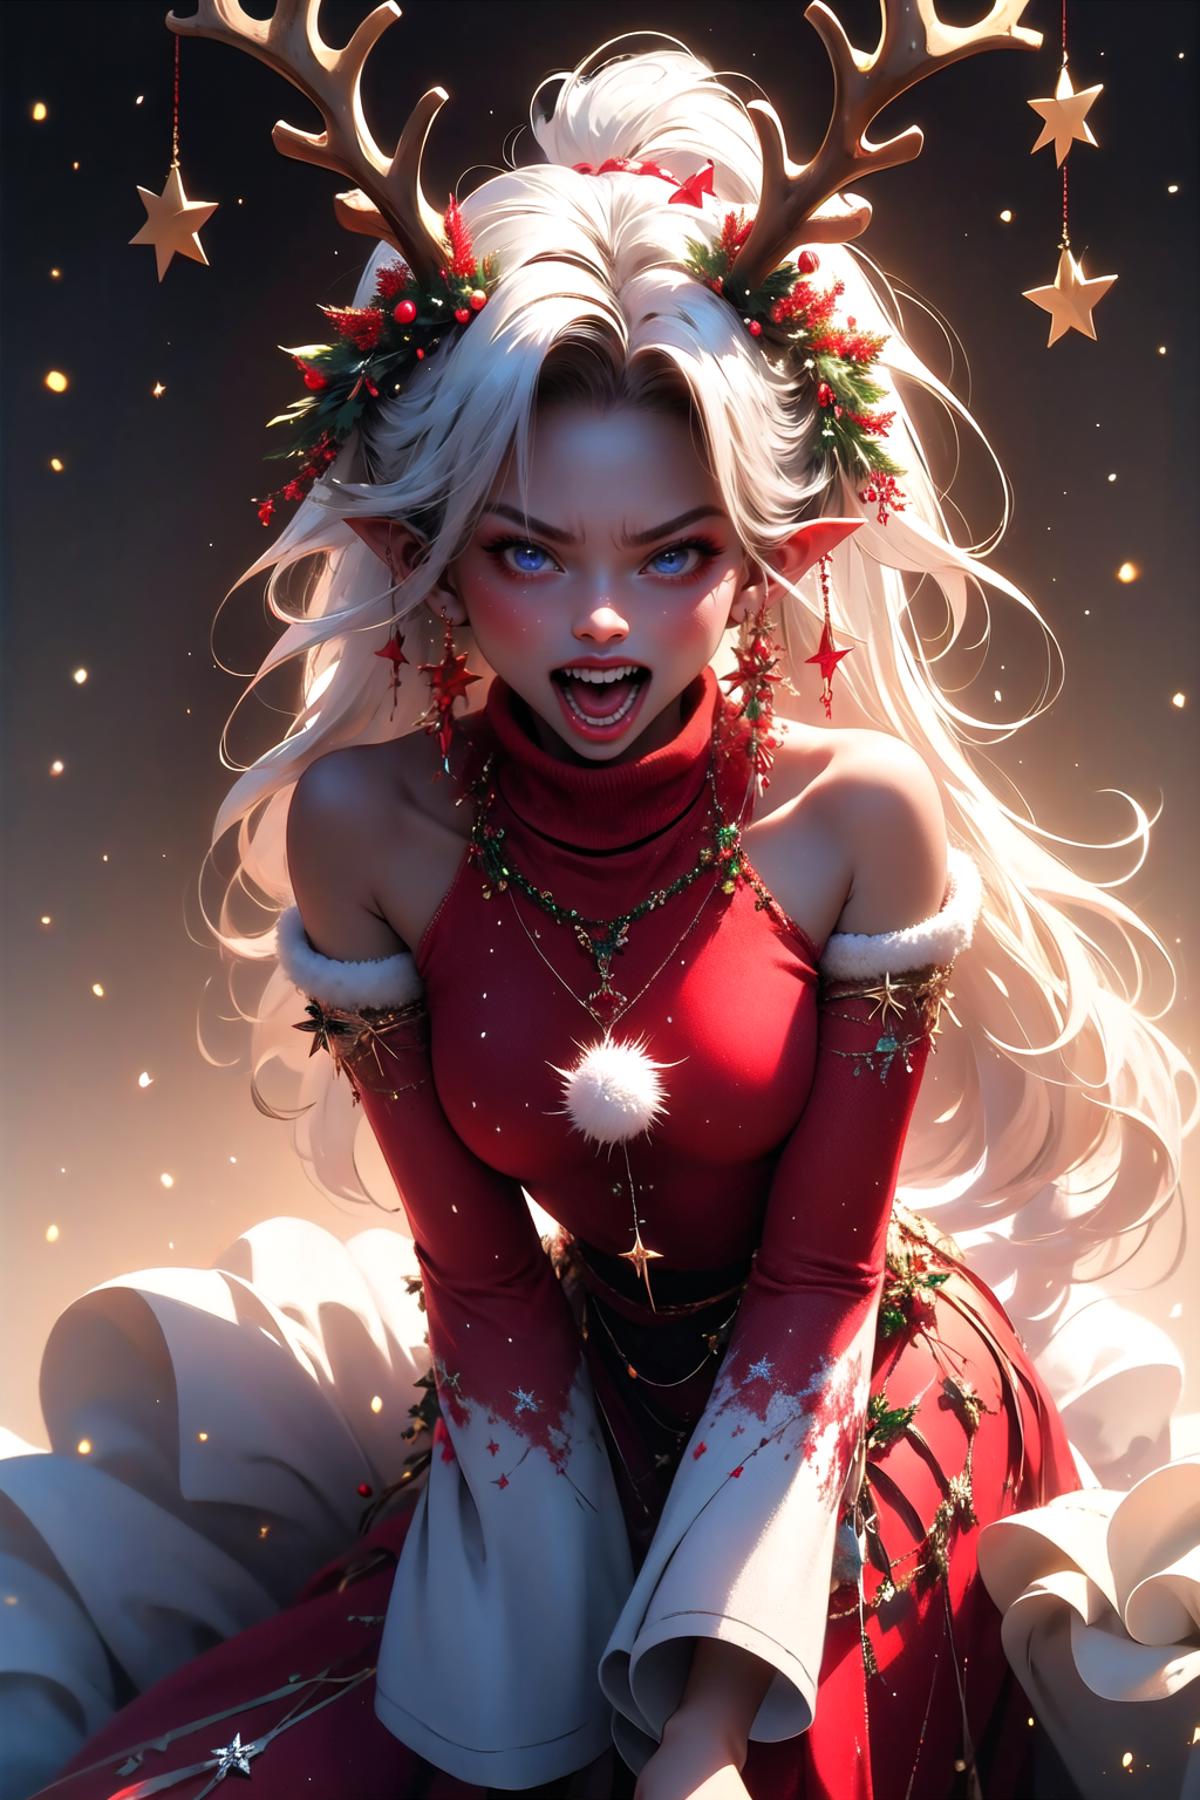 A beautifully rendered female elf with white hair and a red dress, wearing a necklace and earrings, and showing her teeth in a wide smile.